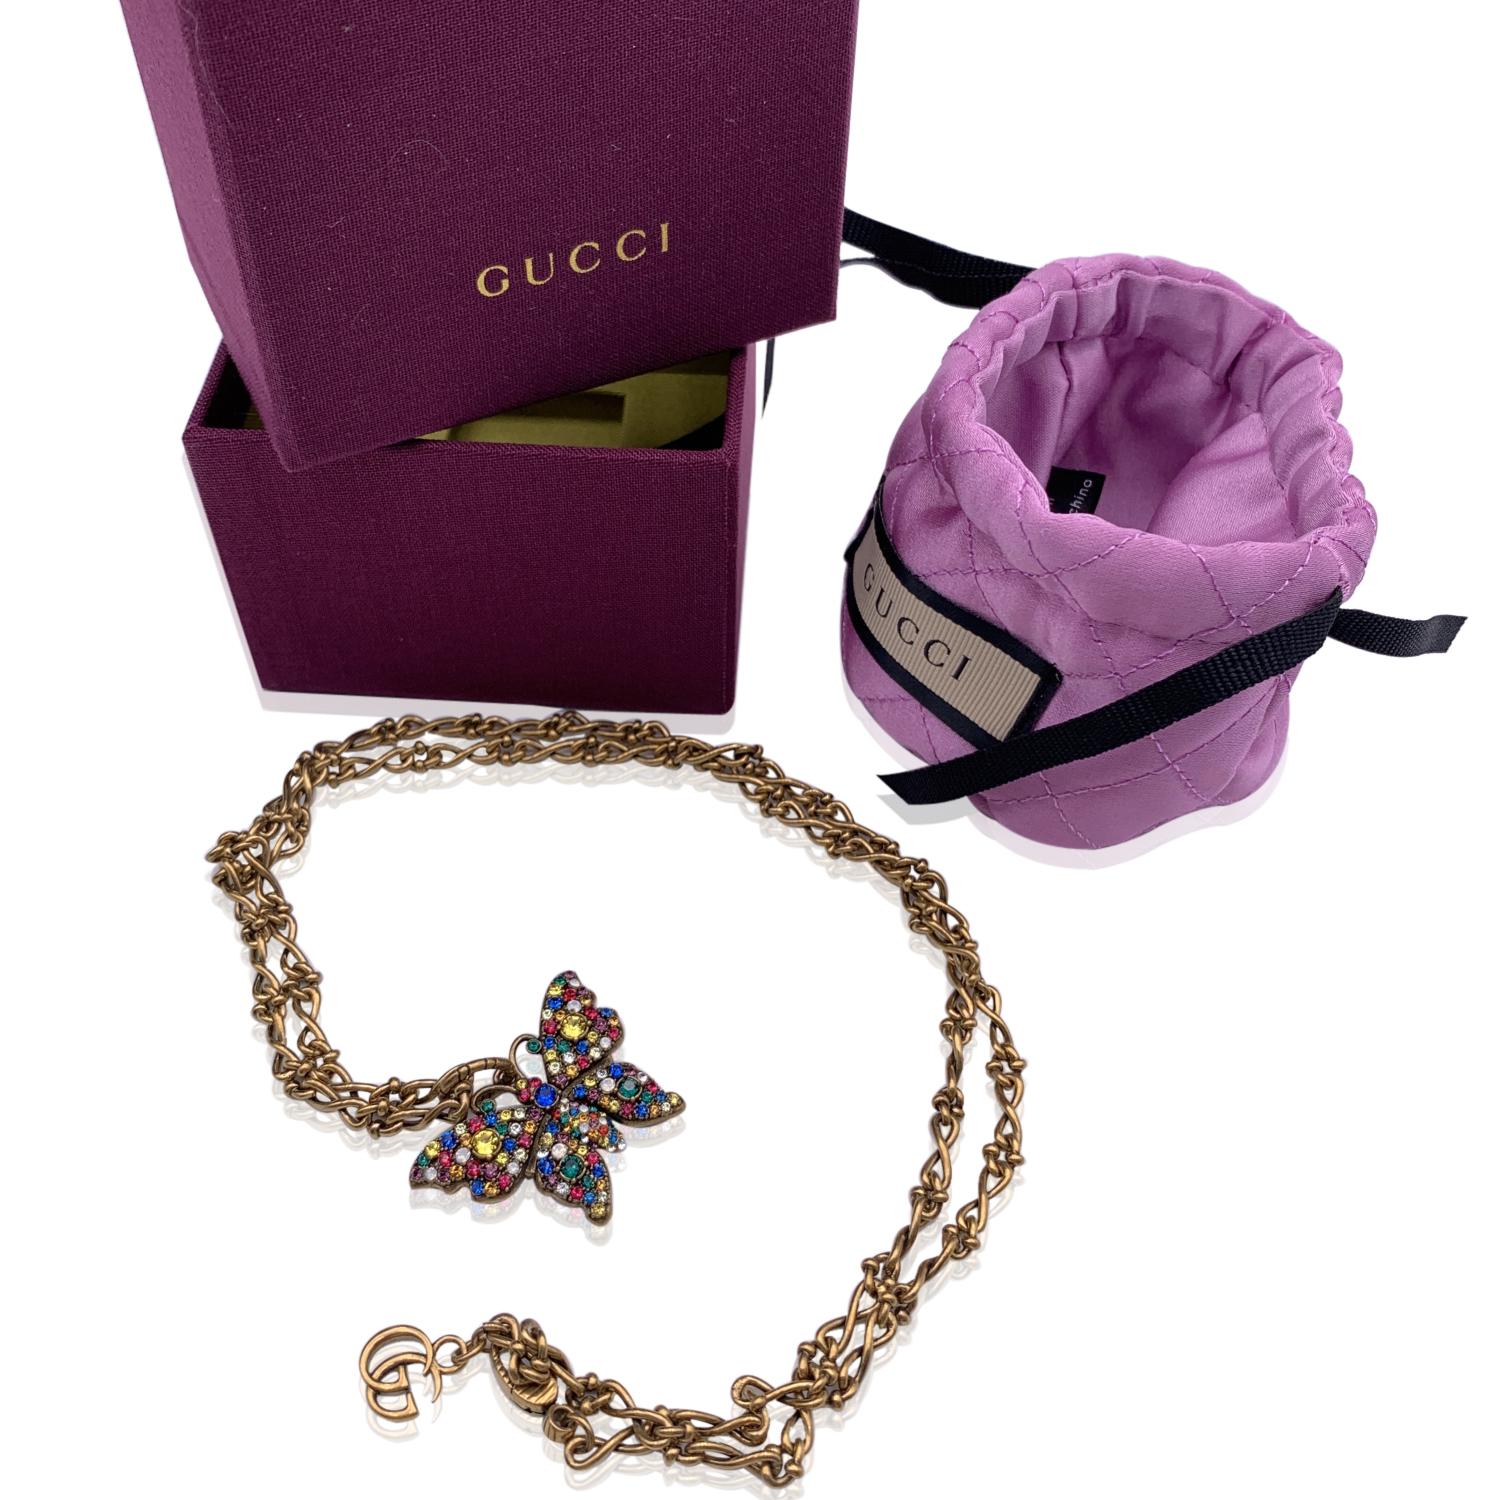 Gucci aged old metal chain necklace with multicolor crystal butterfly pendant. Lobster clasp closure. Total length of the chain: 26 inches - 66 cm. 'Gucci - Made in Italy' engraved on GG charm at the end of the necklace.





Condition

A+ -